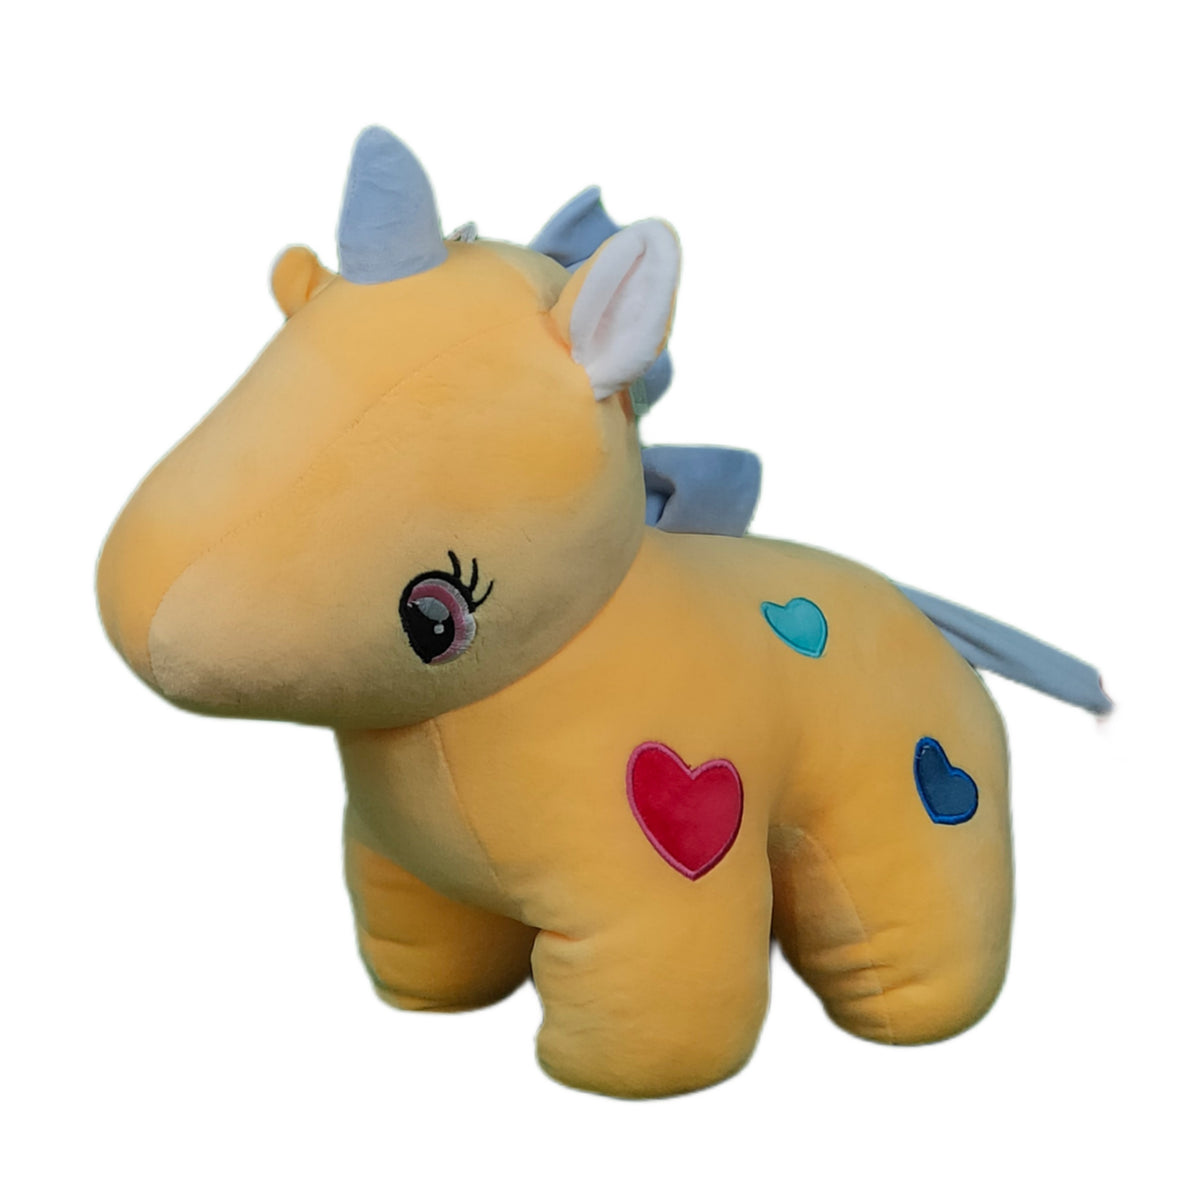 Play Hour Fairy Unicorn Plush Soft Toy For Ages 3 Years And Up - Yellow, 45cm